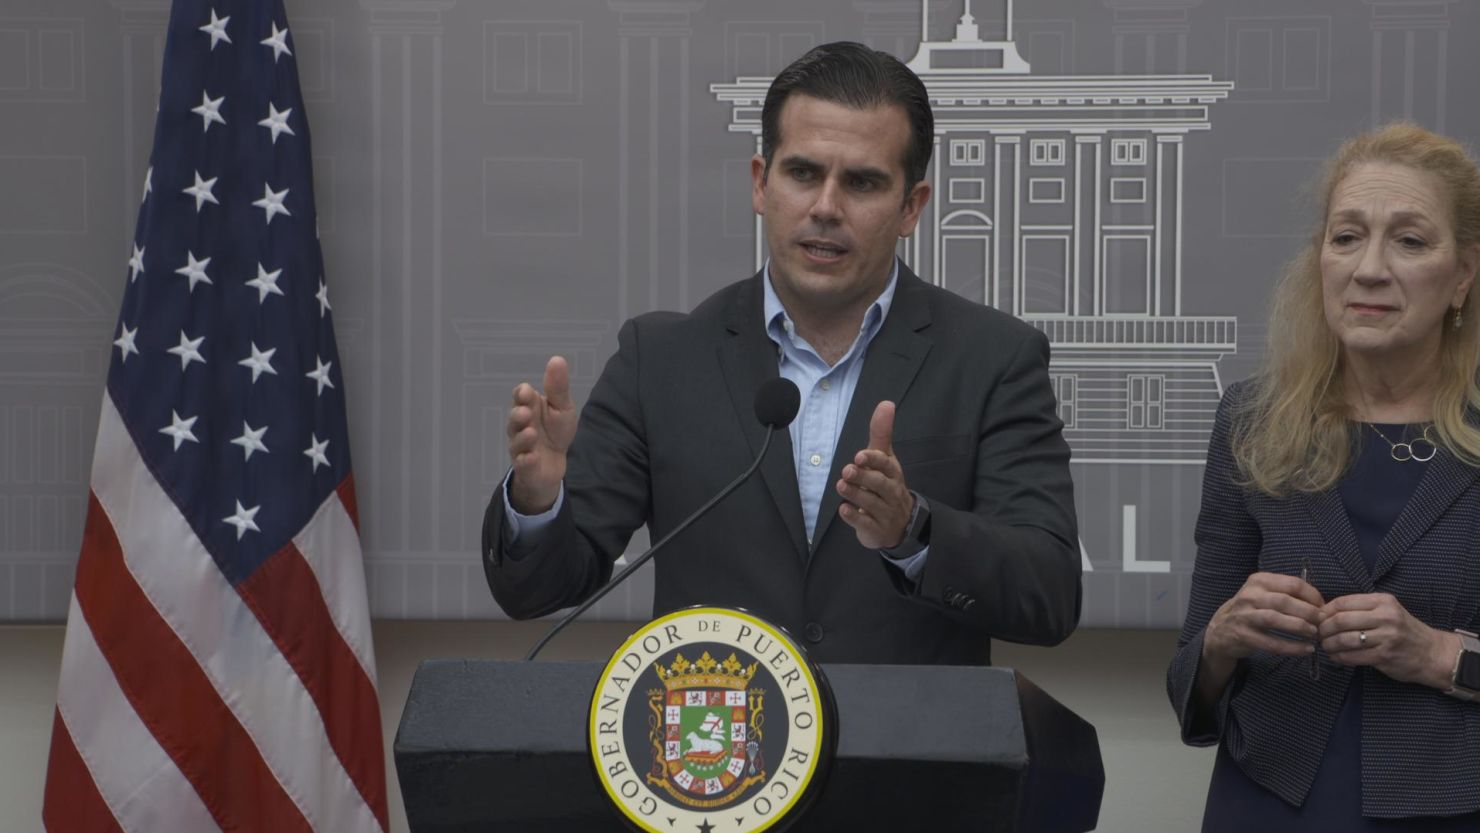 Puerto Rico Gov. Ricardo Rosselló held a press conference with George Washington University scientists on Thursday to announce a review of deaths after Hurricane Maria.